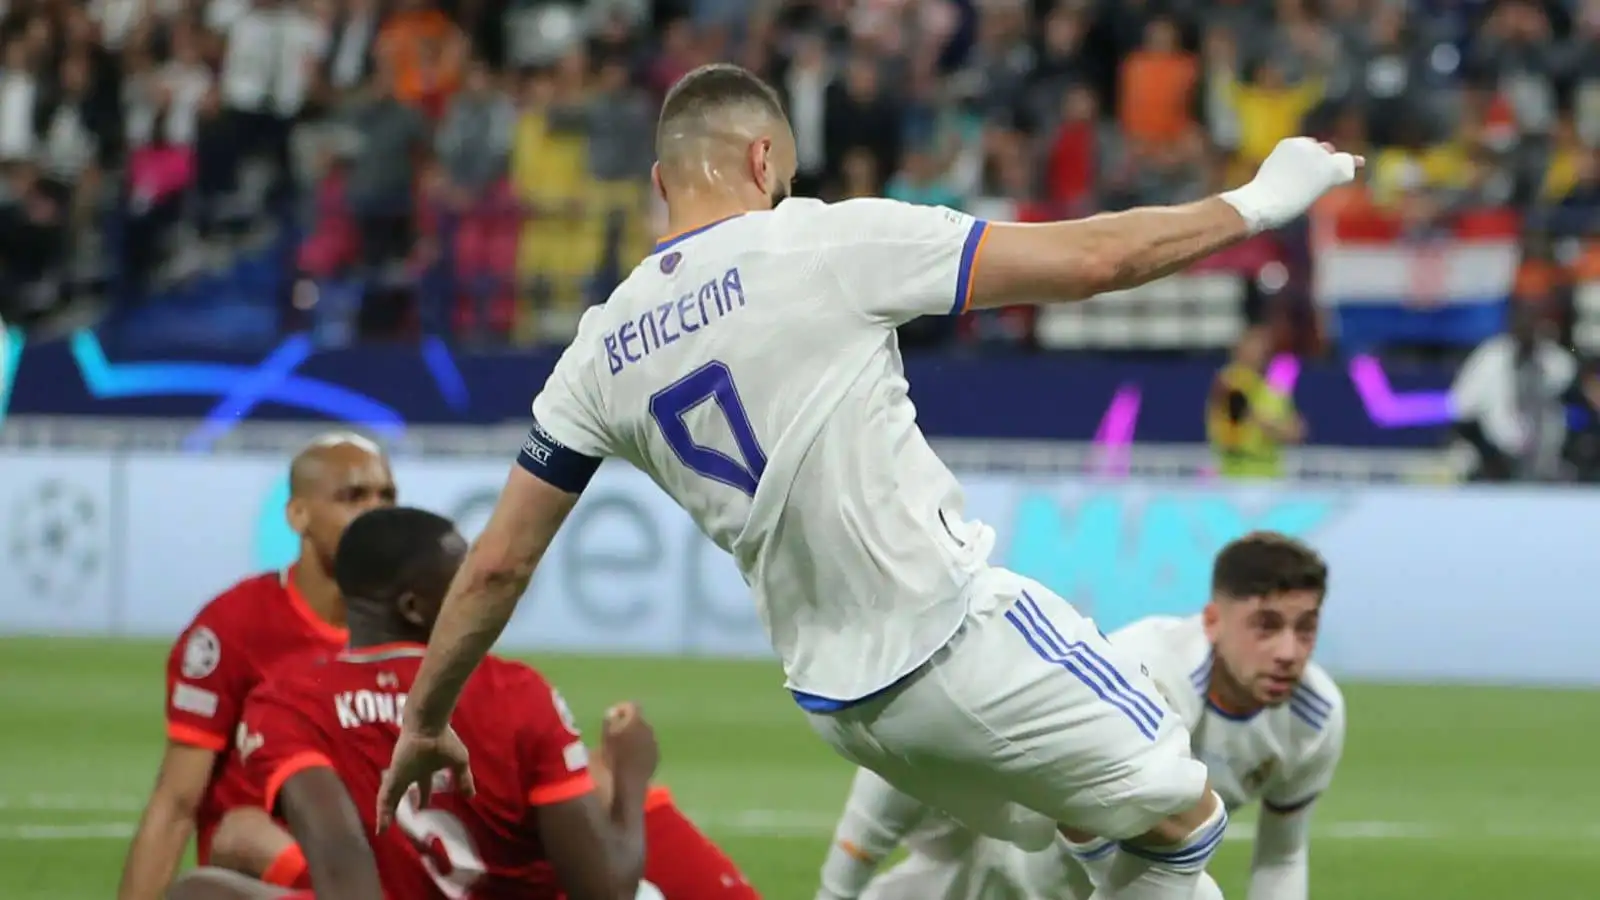 Karim Benzema of Real Madrid scores to give the side a 1-0 lead only for his effort to be disallowed for offside during the UEFA Champions League match at Stade de France, Paris.